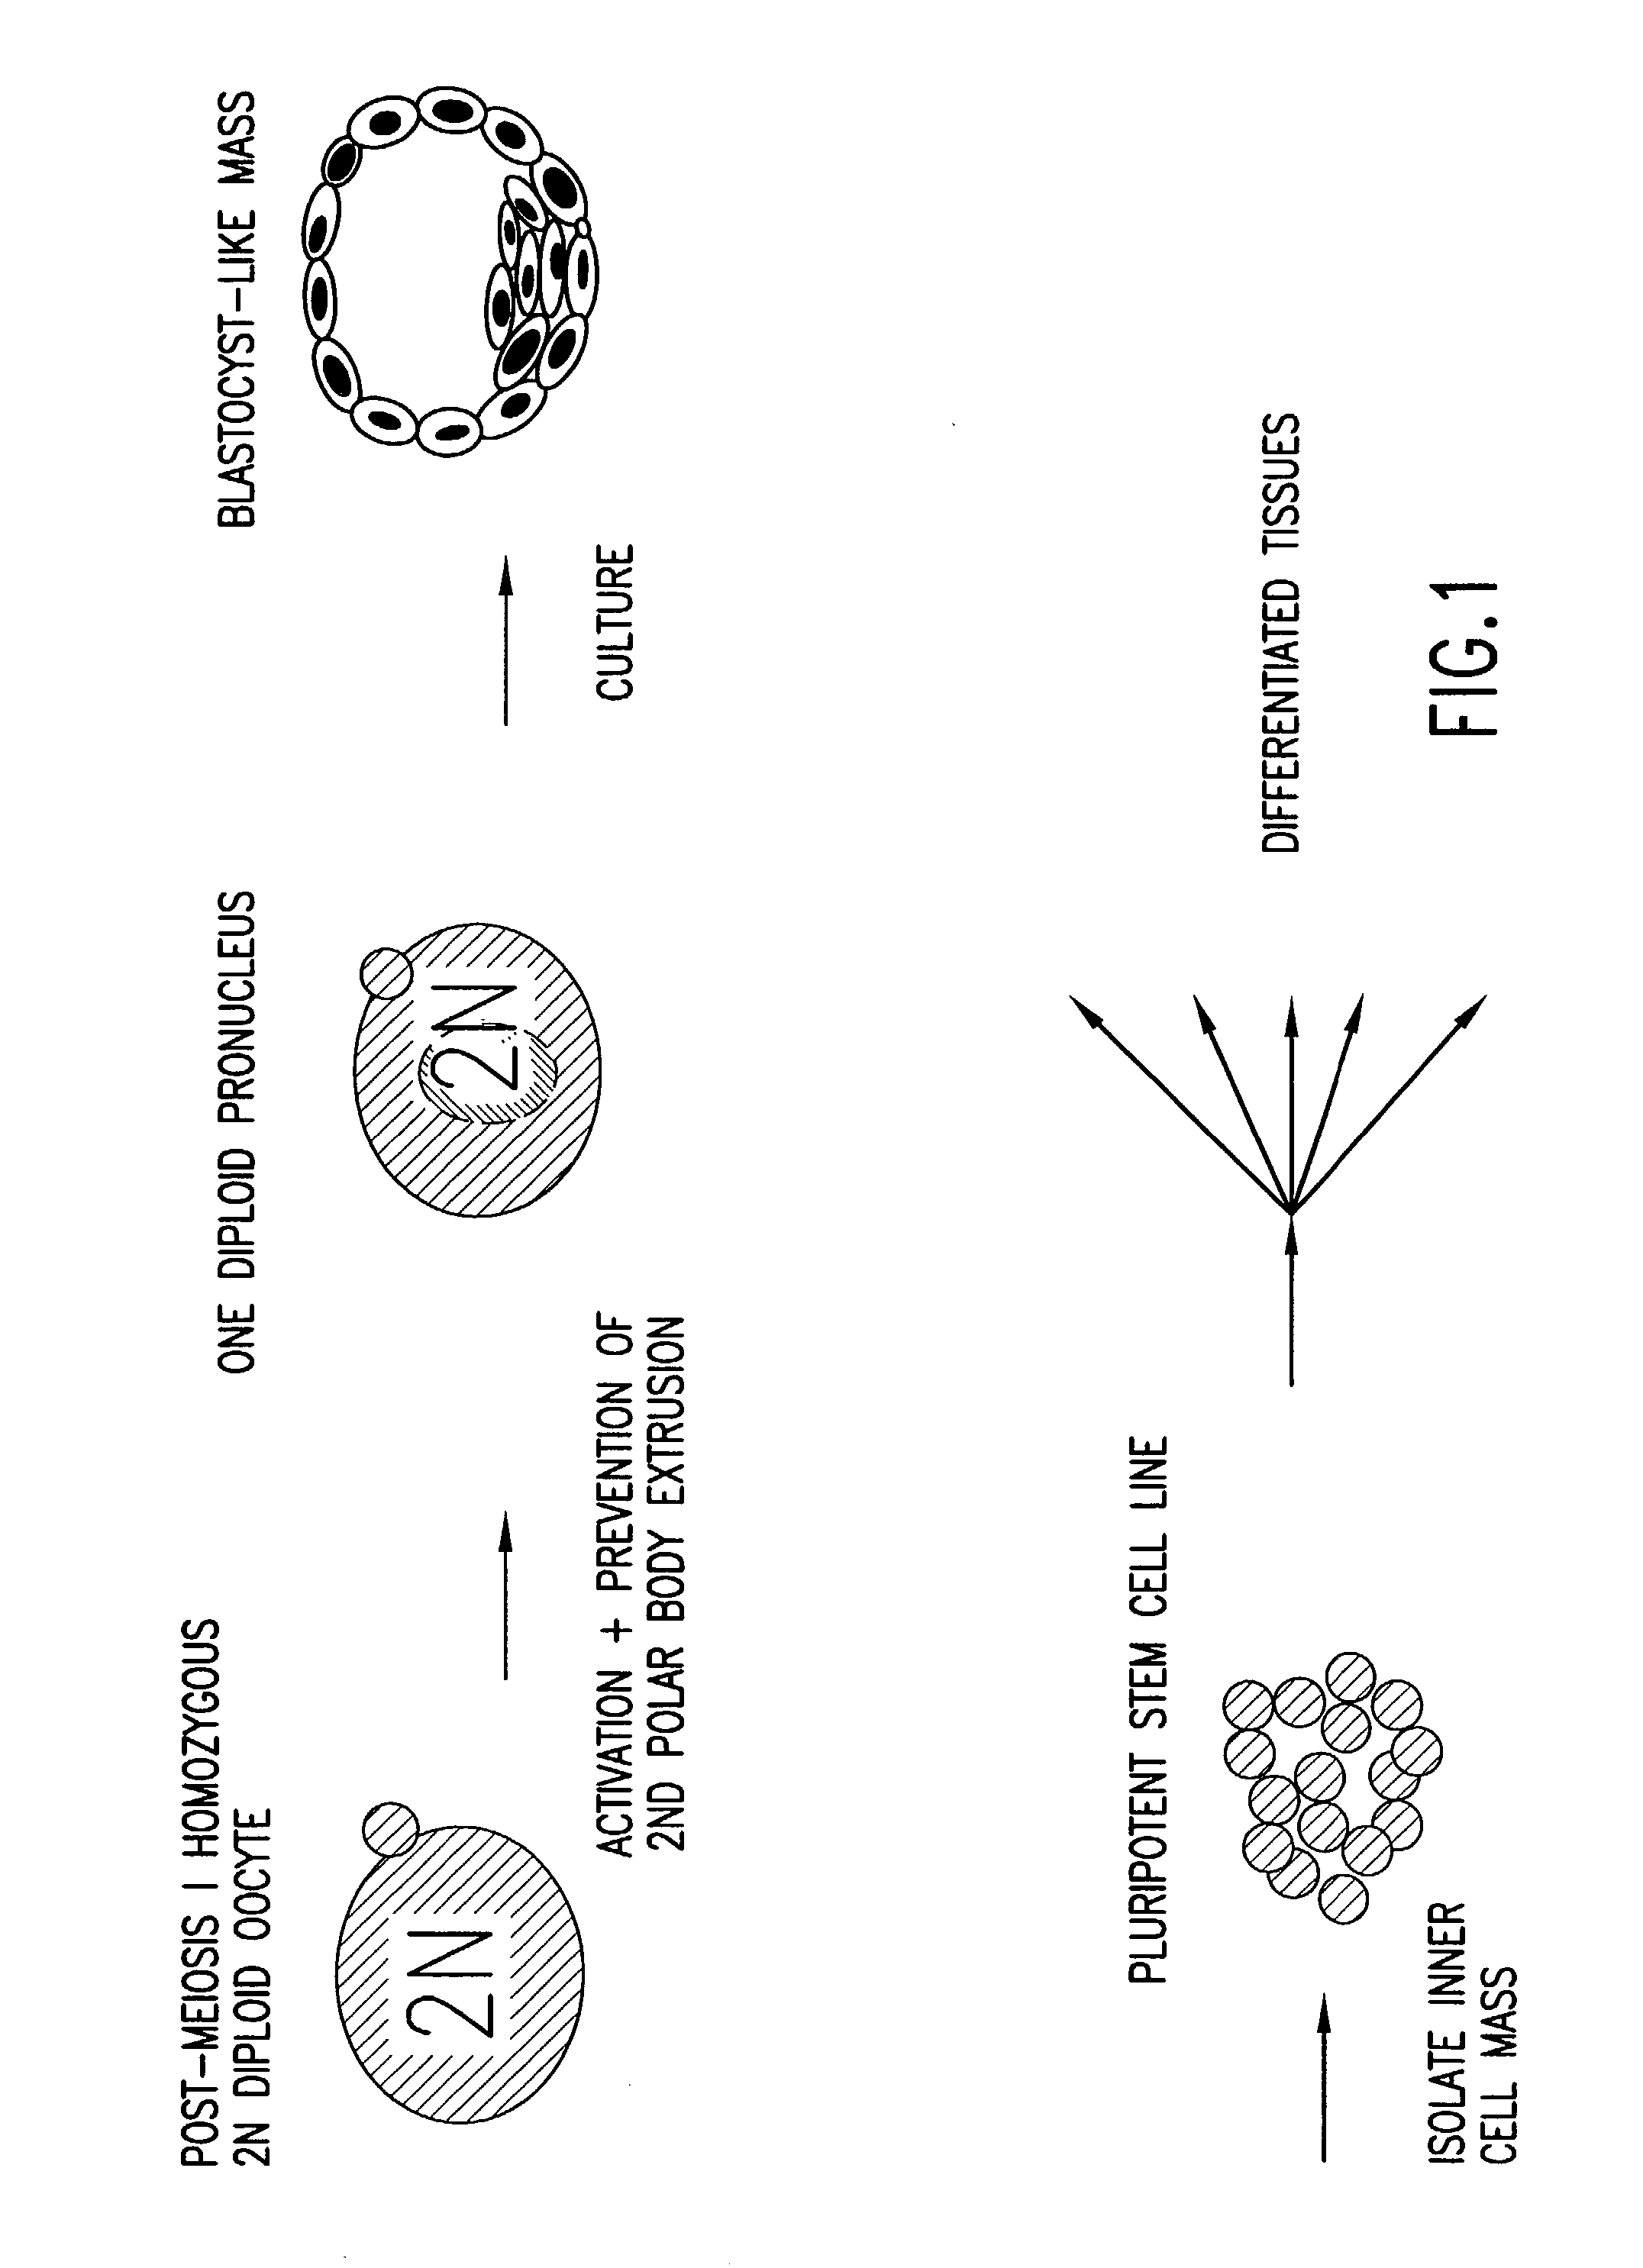 Isolated homozygous stem cells, differentiated cells derived therefrom, and materials and methods for making and using same